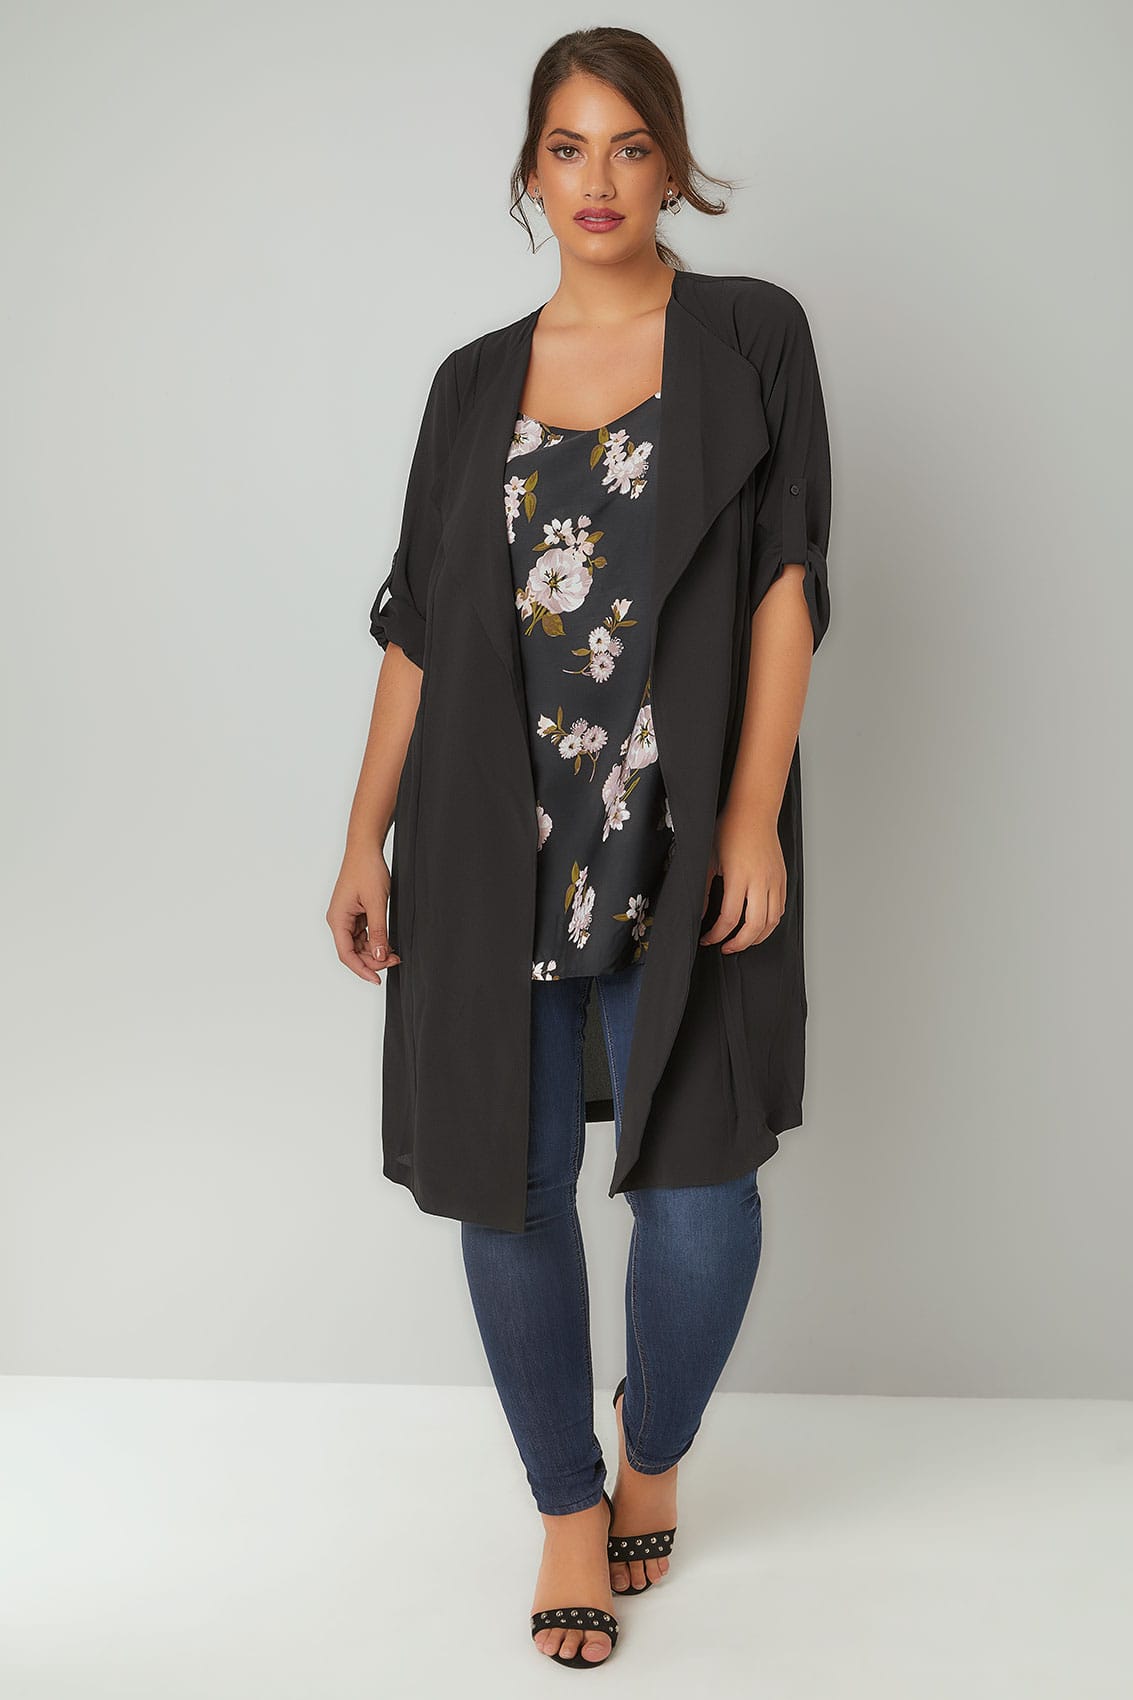 Black Waterfall Duster Jacket, Plus size 16 to 36